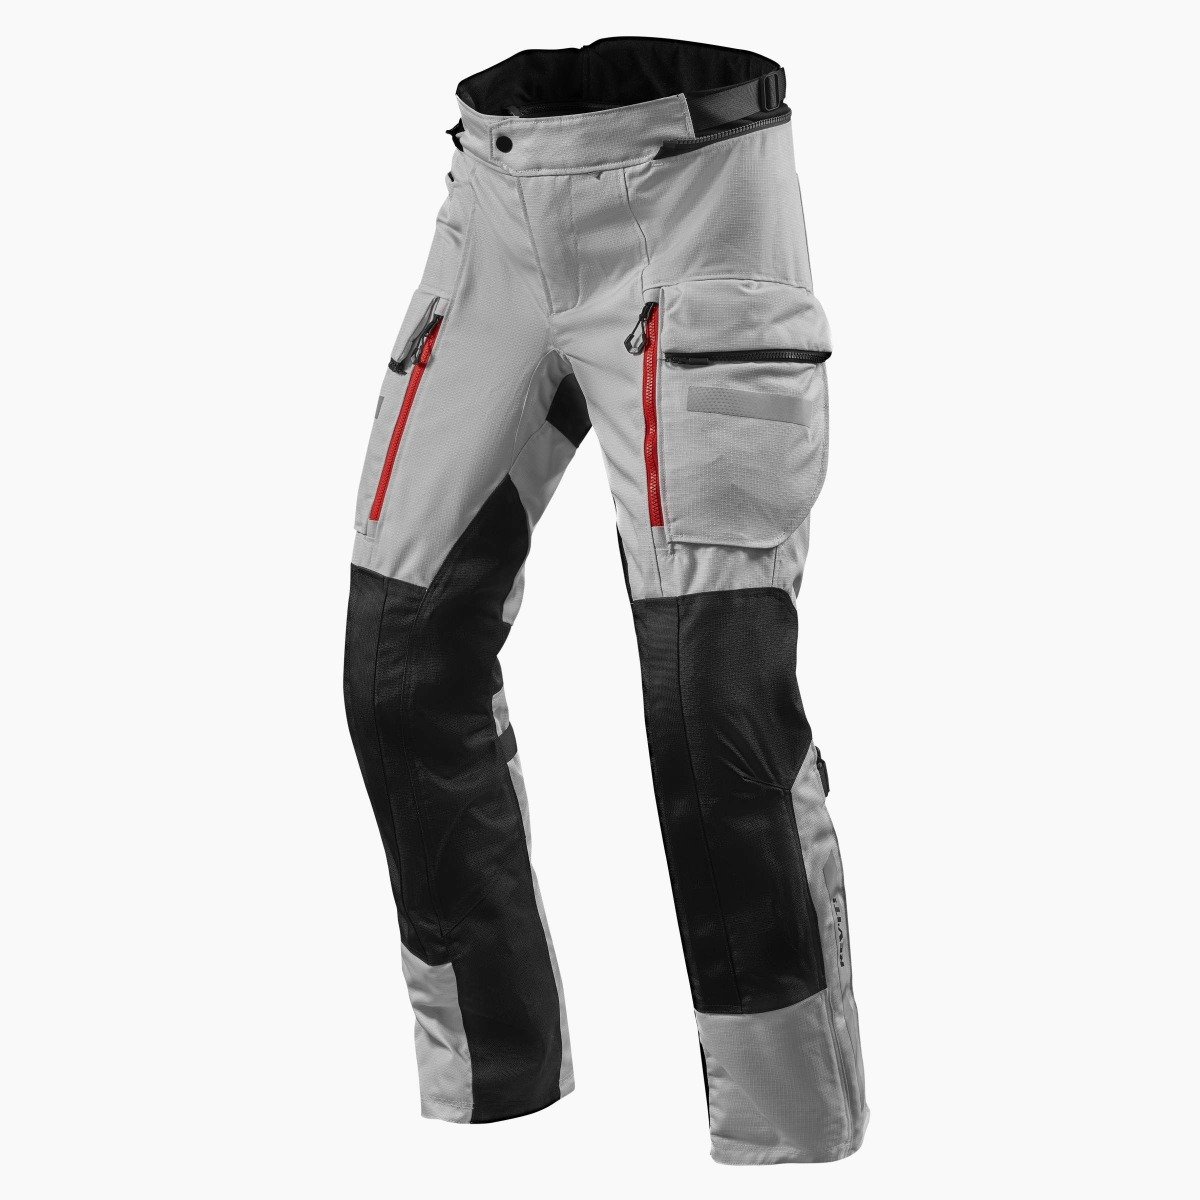 Image of REV'IT! Sand 4 H2O Standard Silver Black Motorcycle Pants Talla S